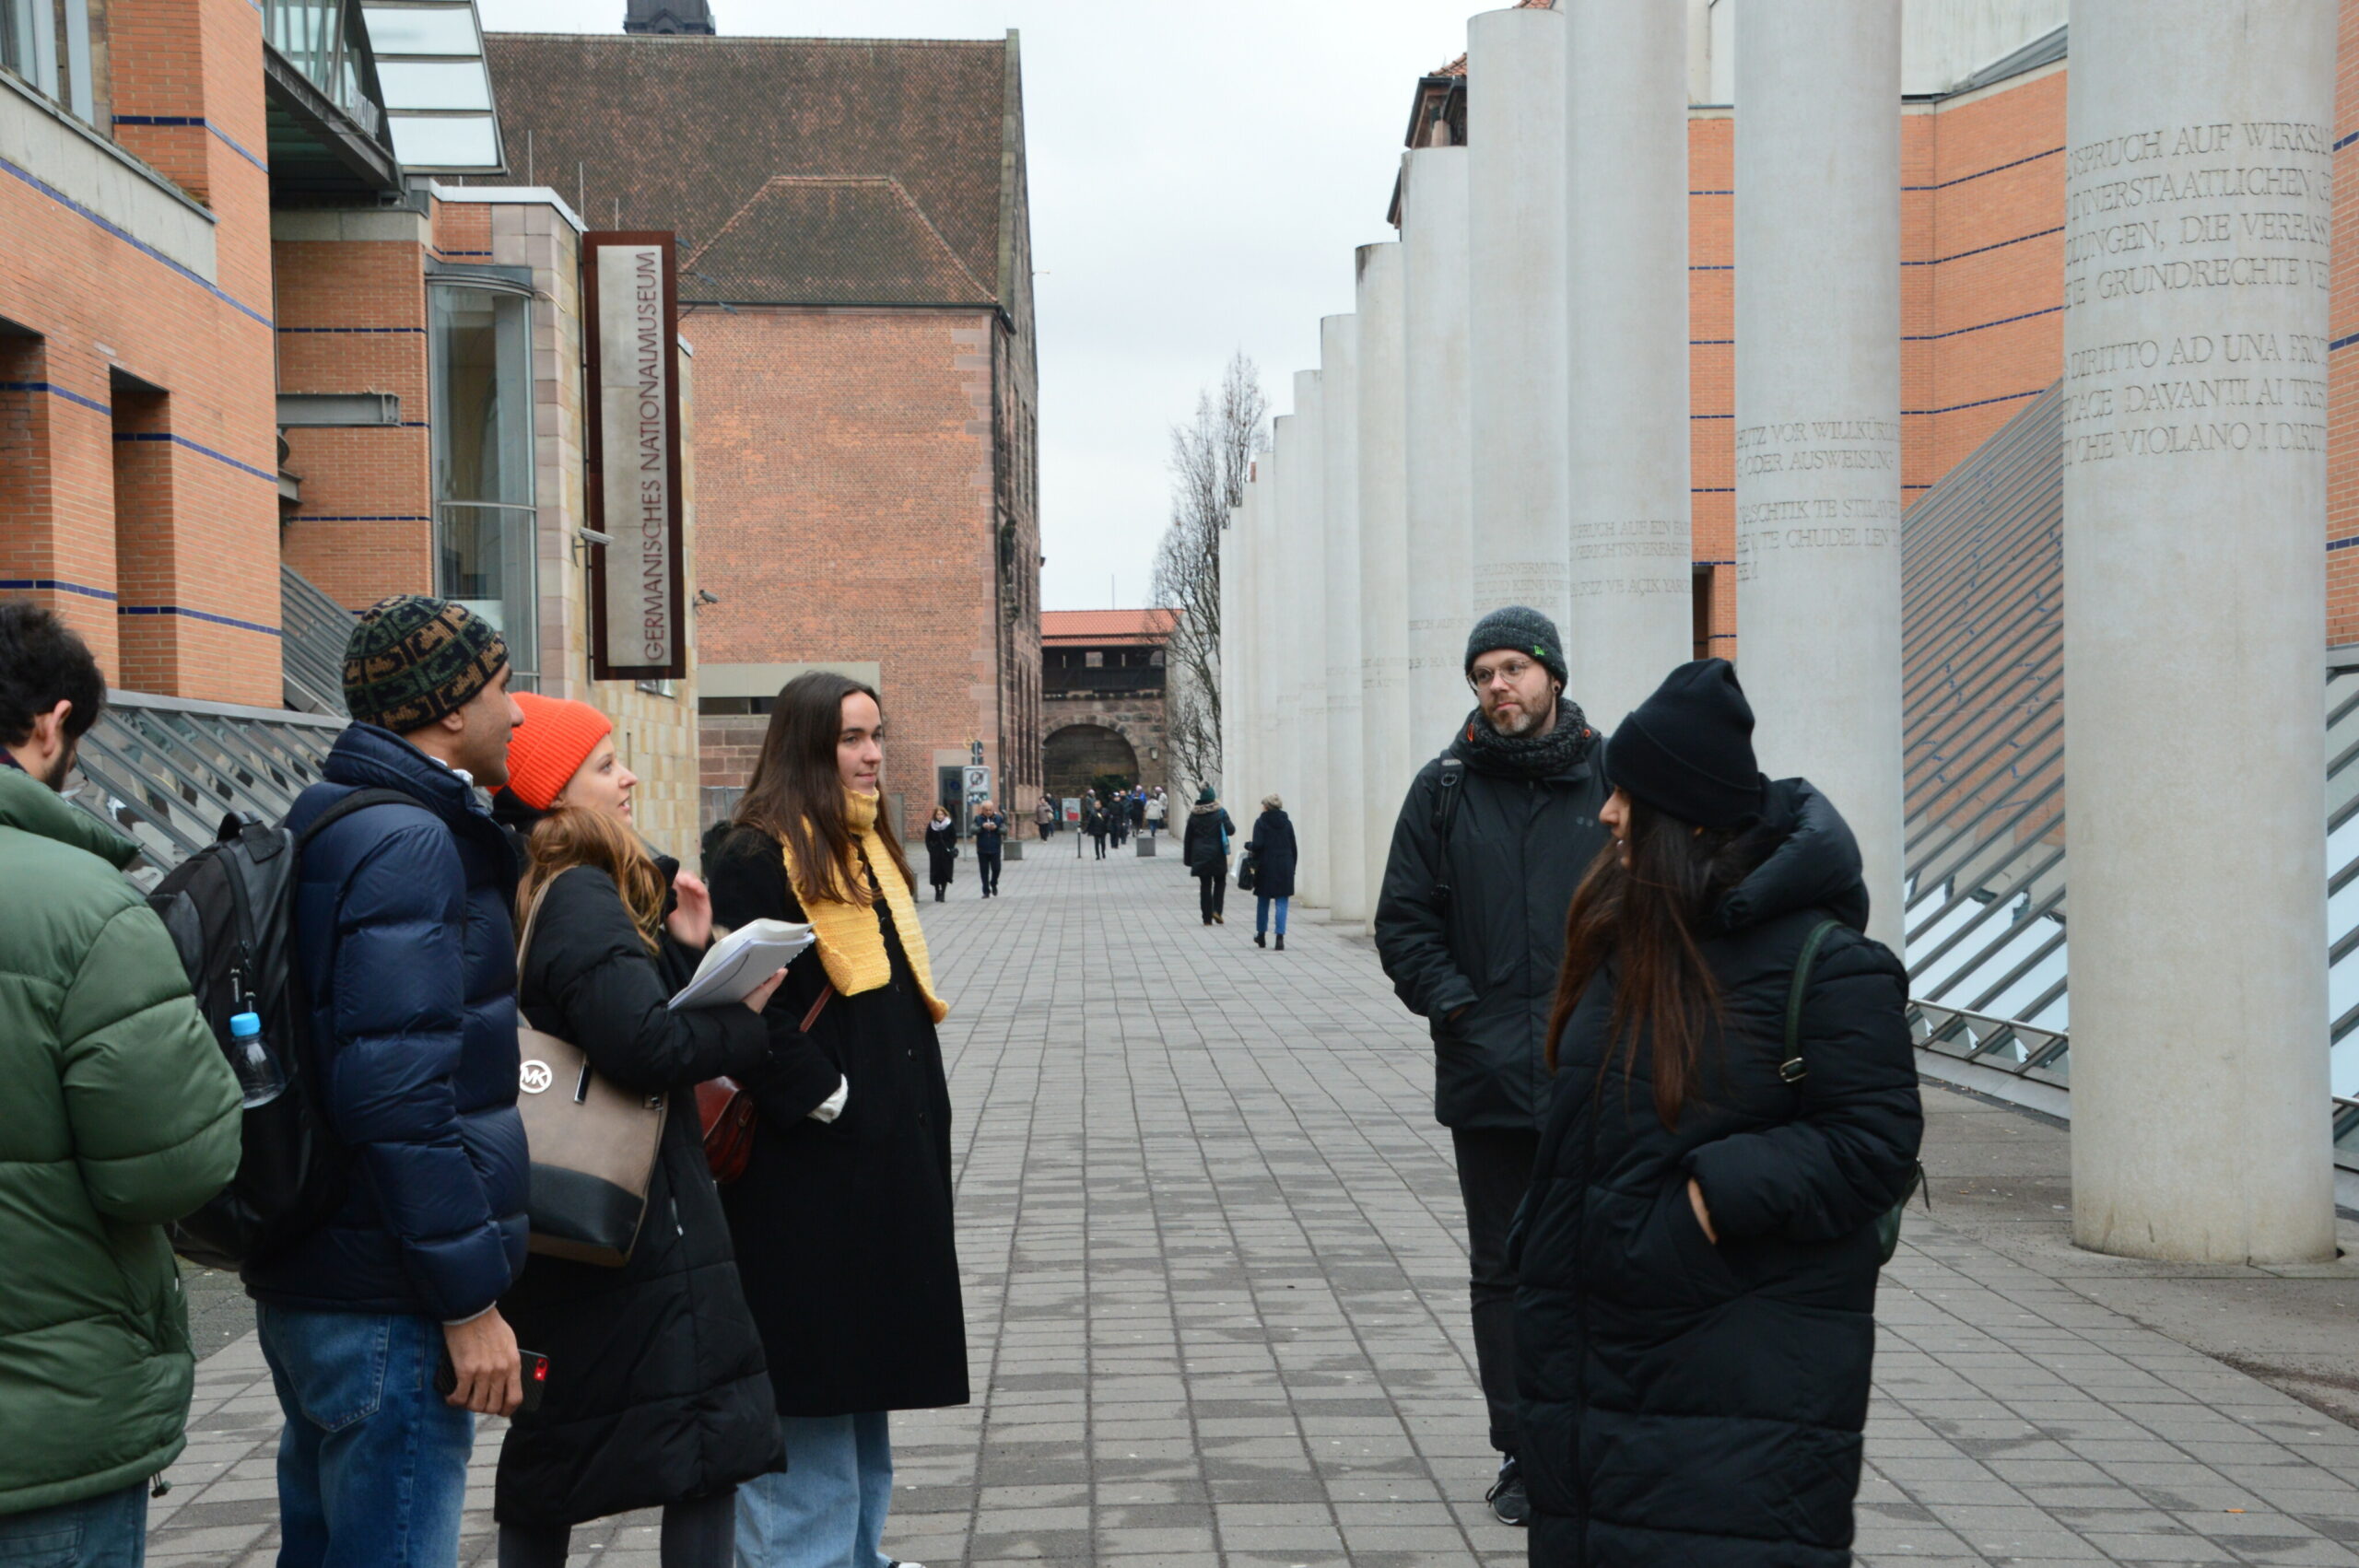 Tour guide and MA Human Rights student discussing the articles engraved into the collar on the "Way of Human Rights"